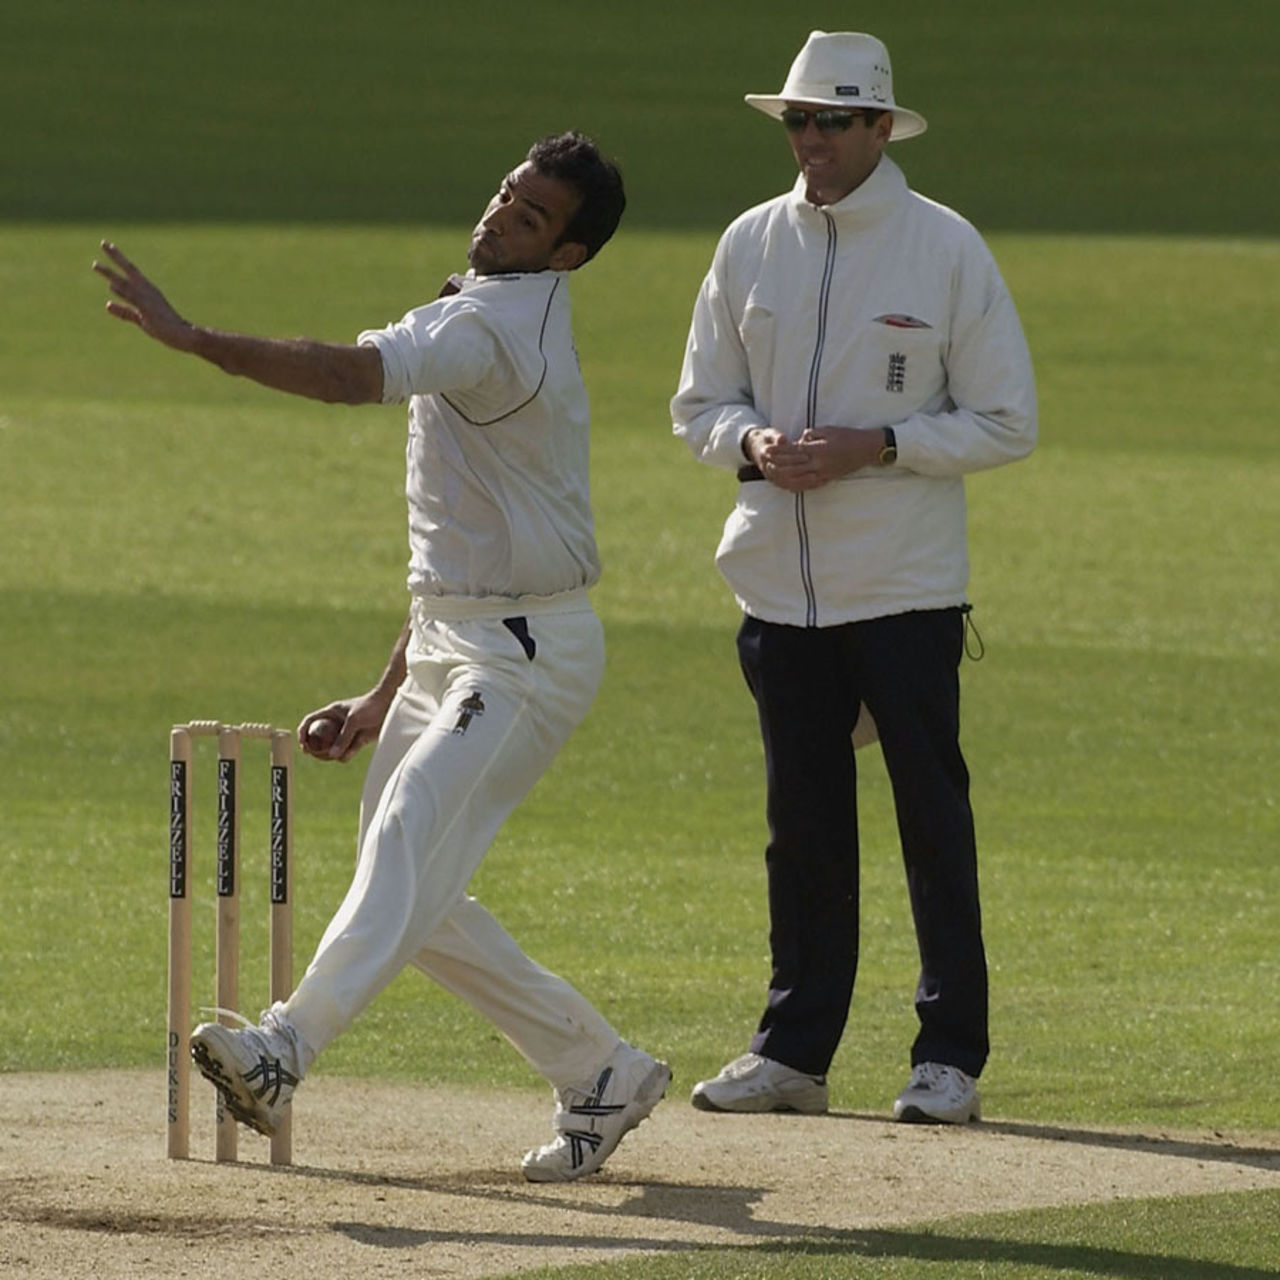 Mohammad Akram bowls, The Oval, May 7, 2005